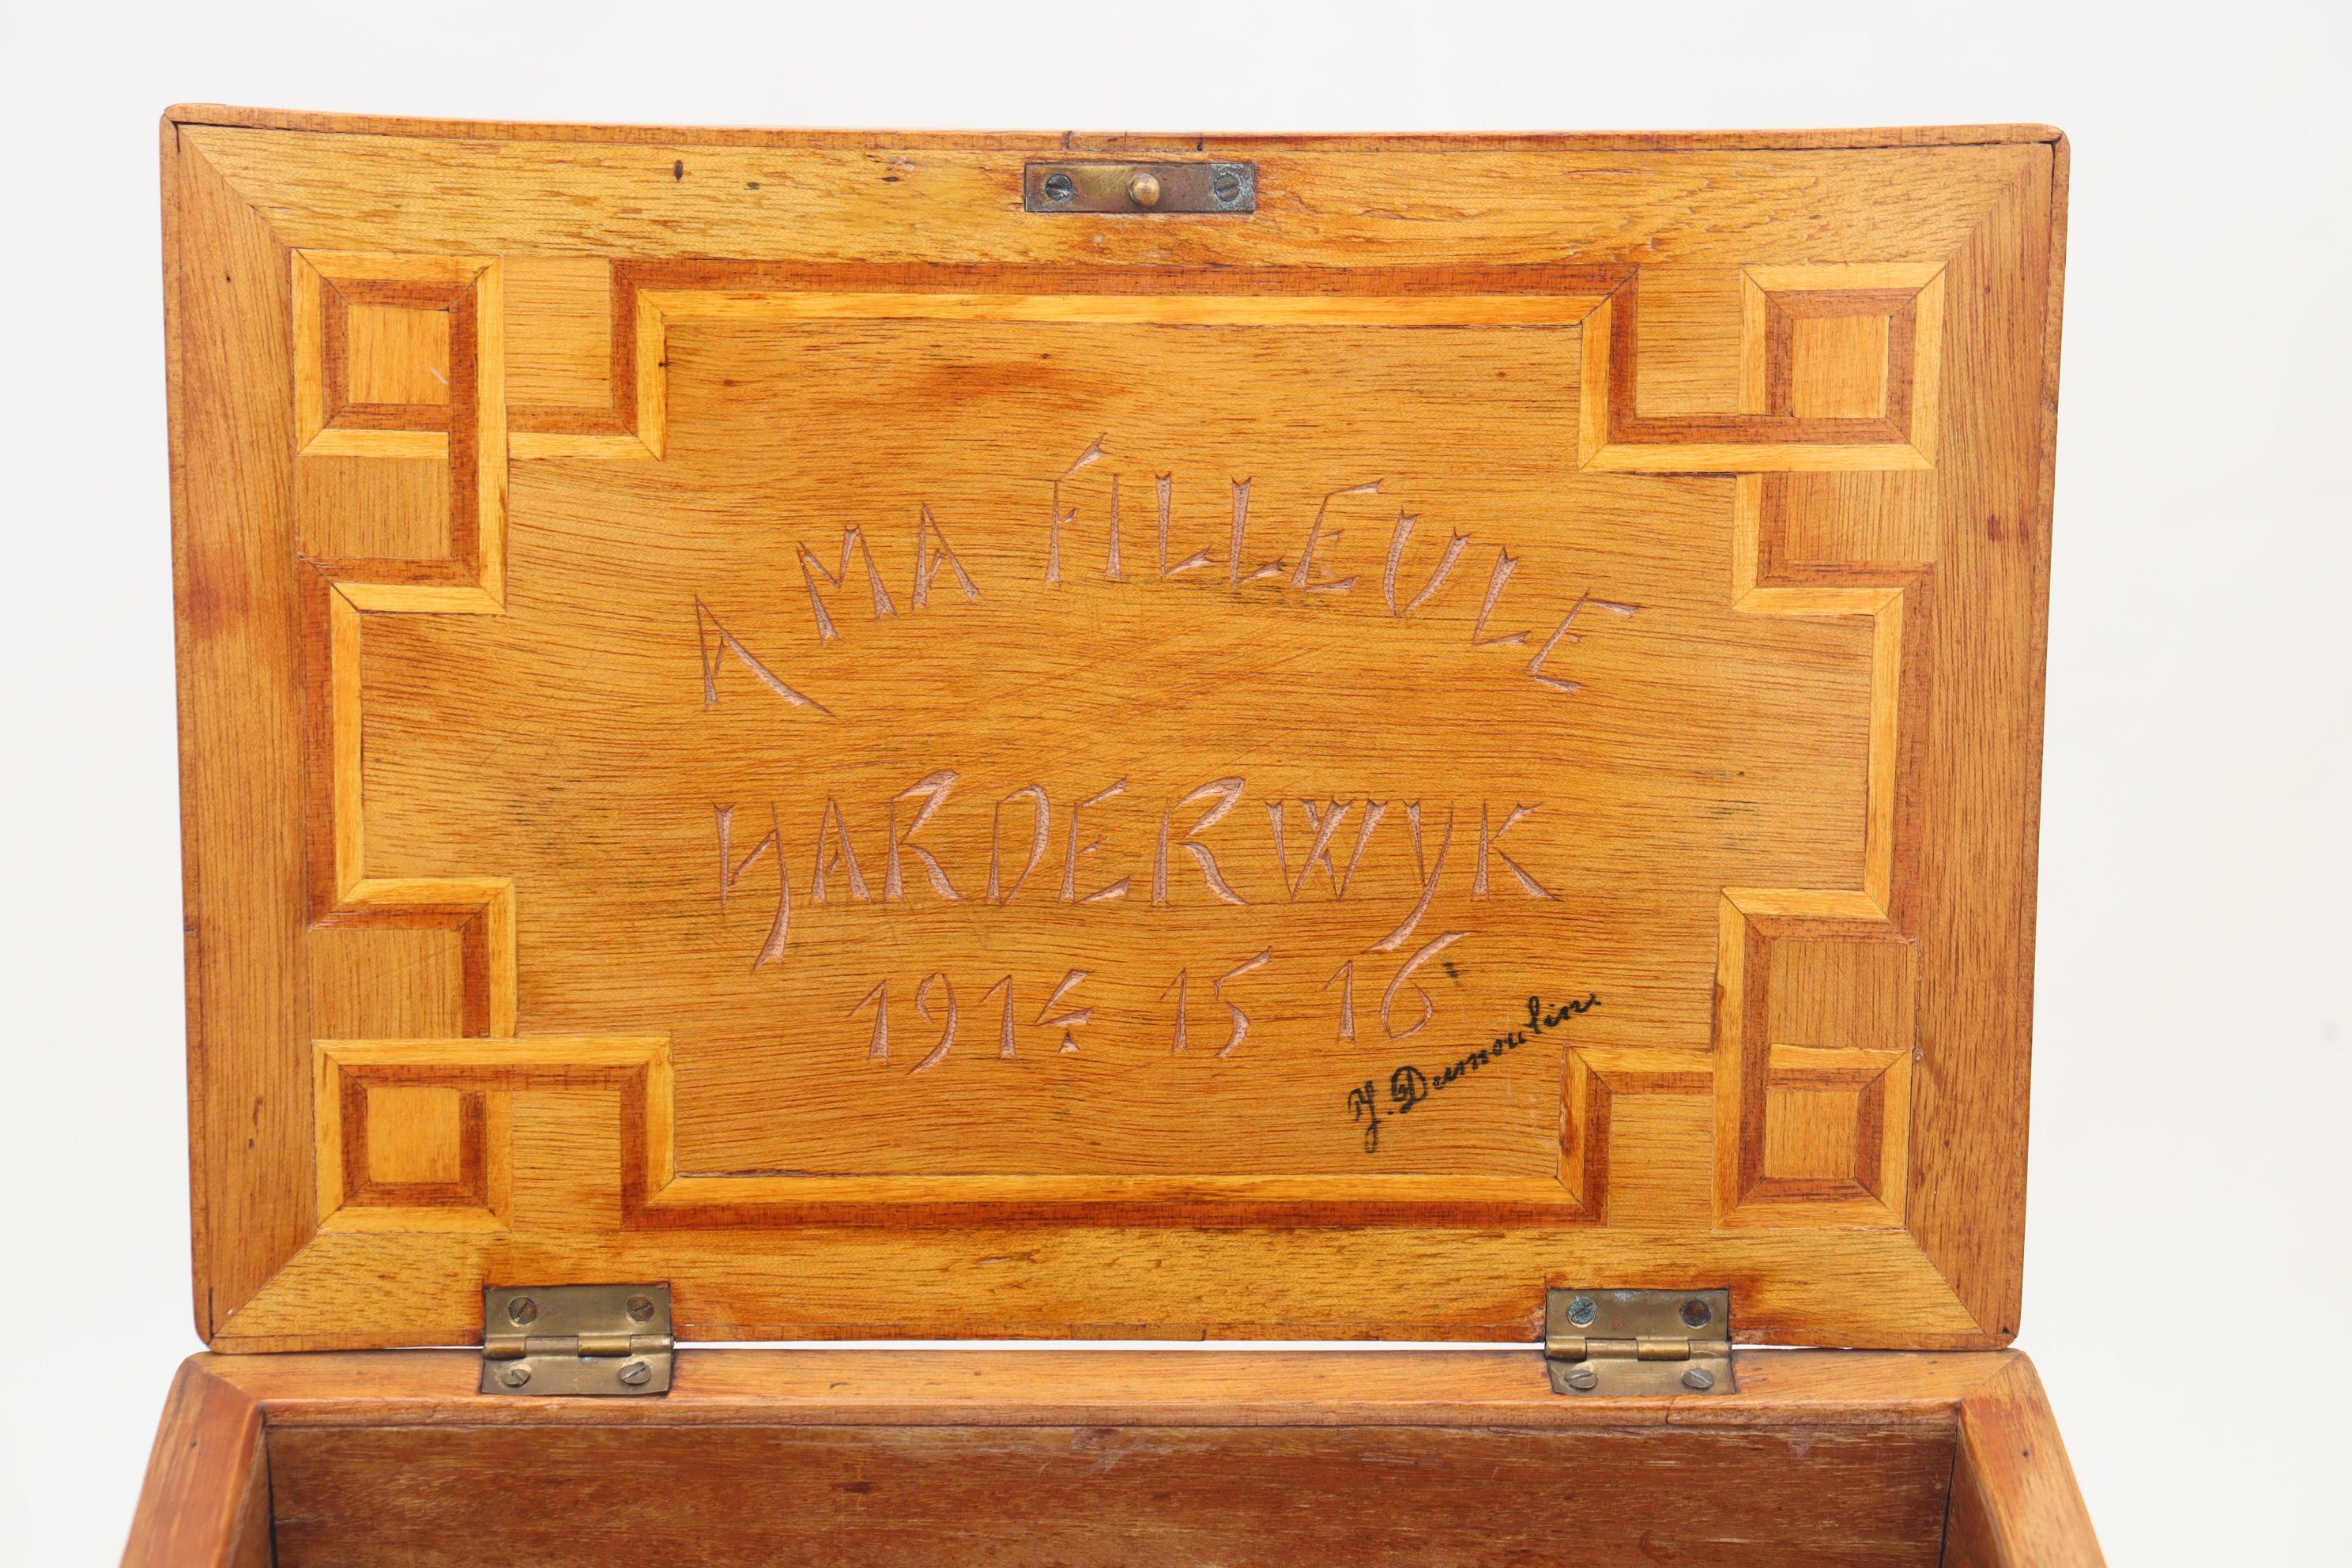 Dutch Inlaid box made in Harderwijk internment camp during WW1 For Sale